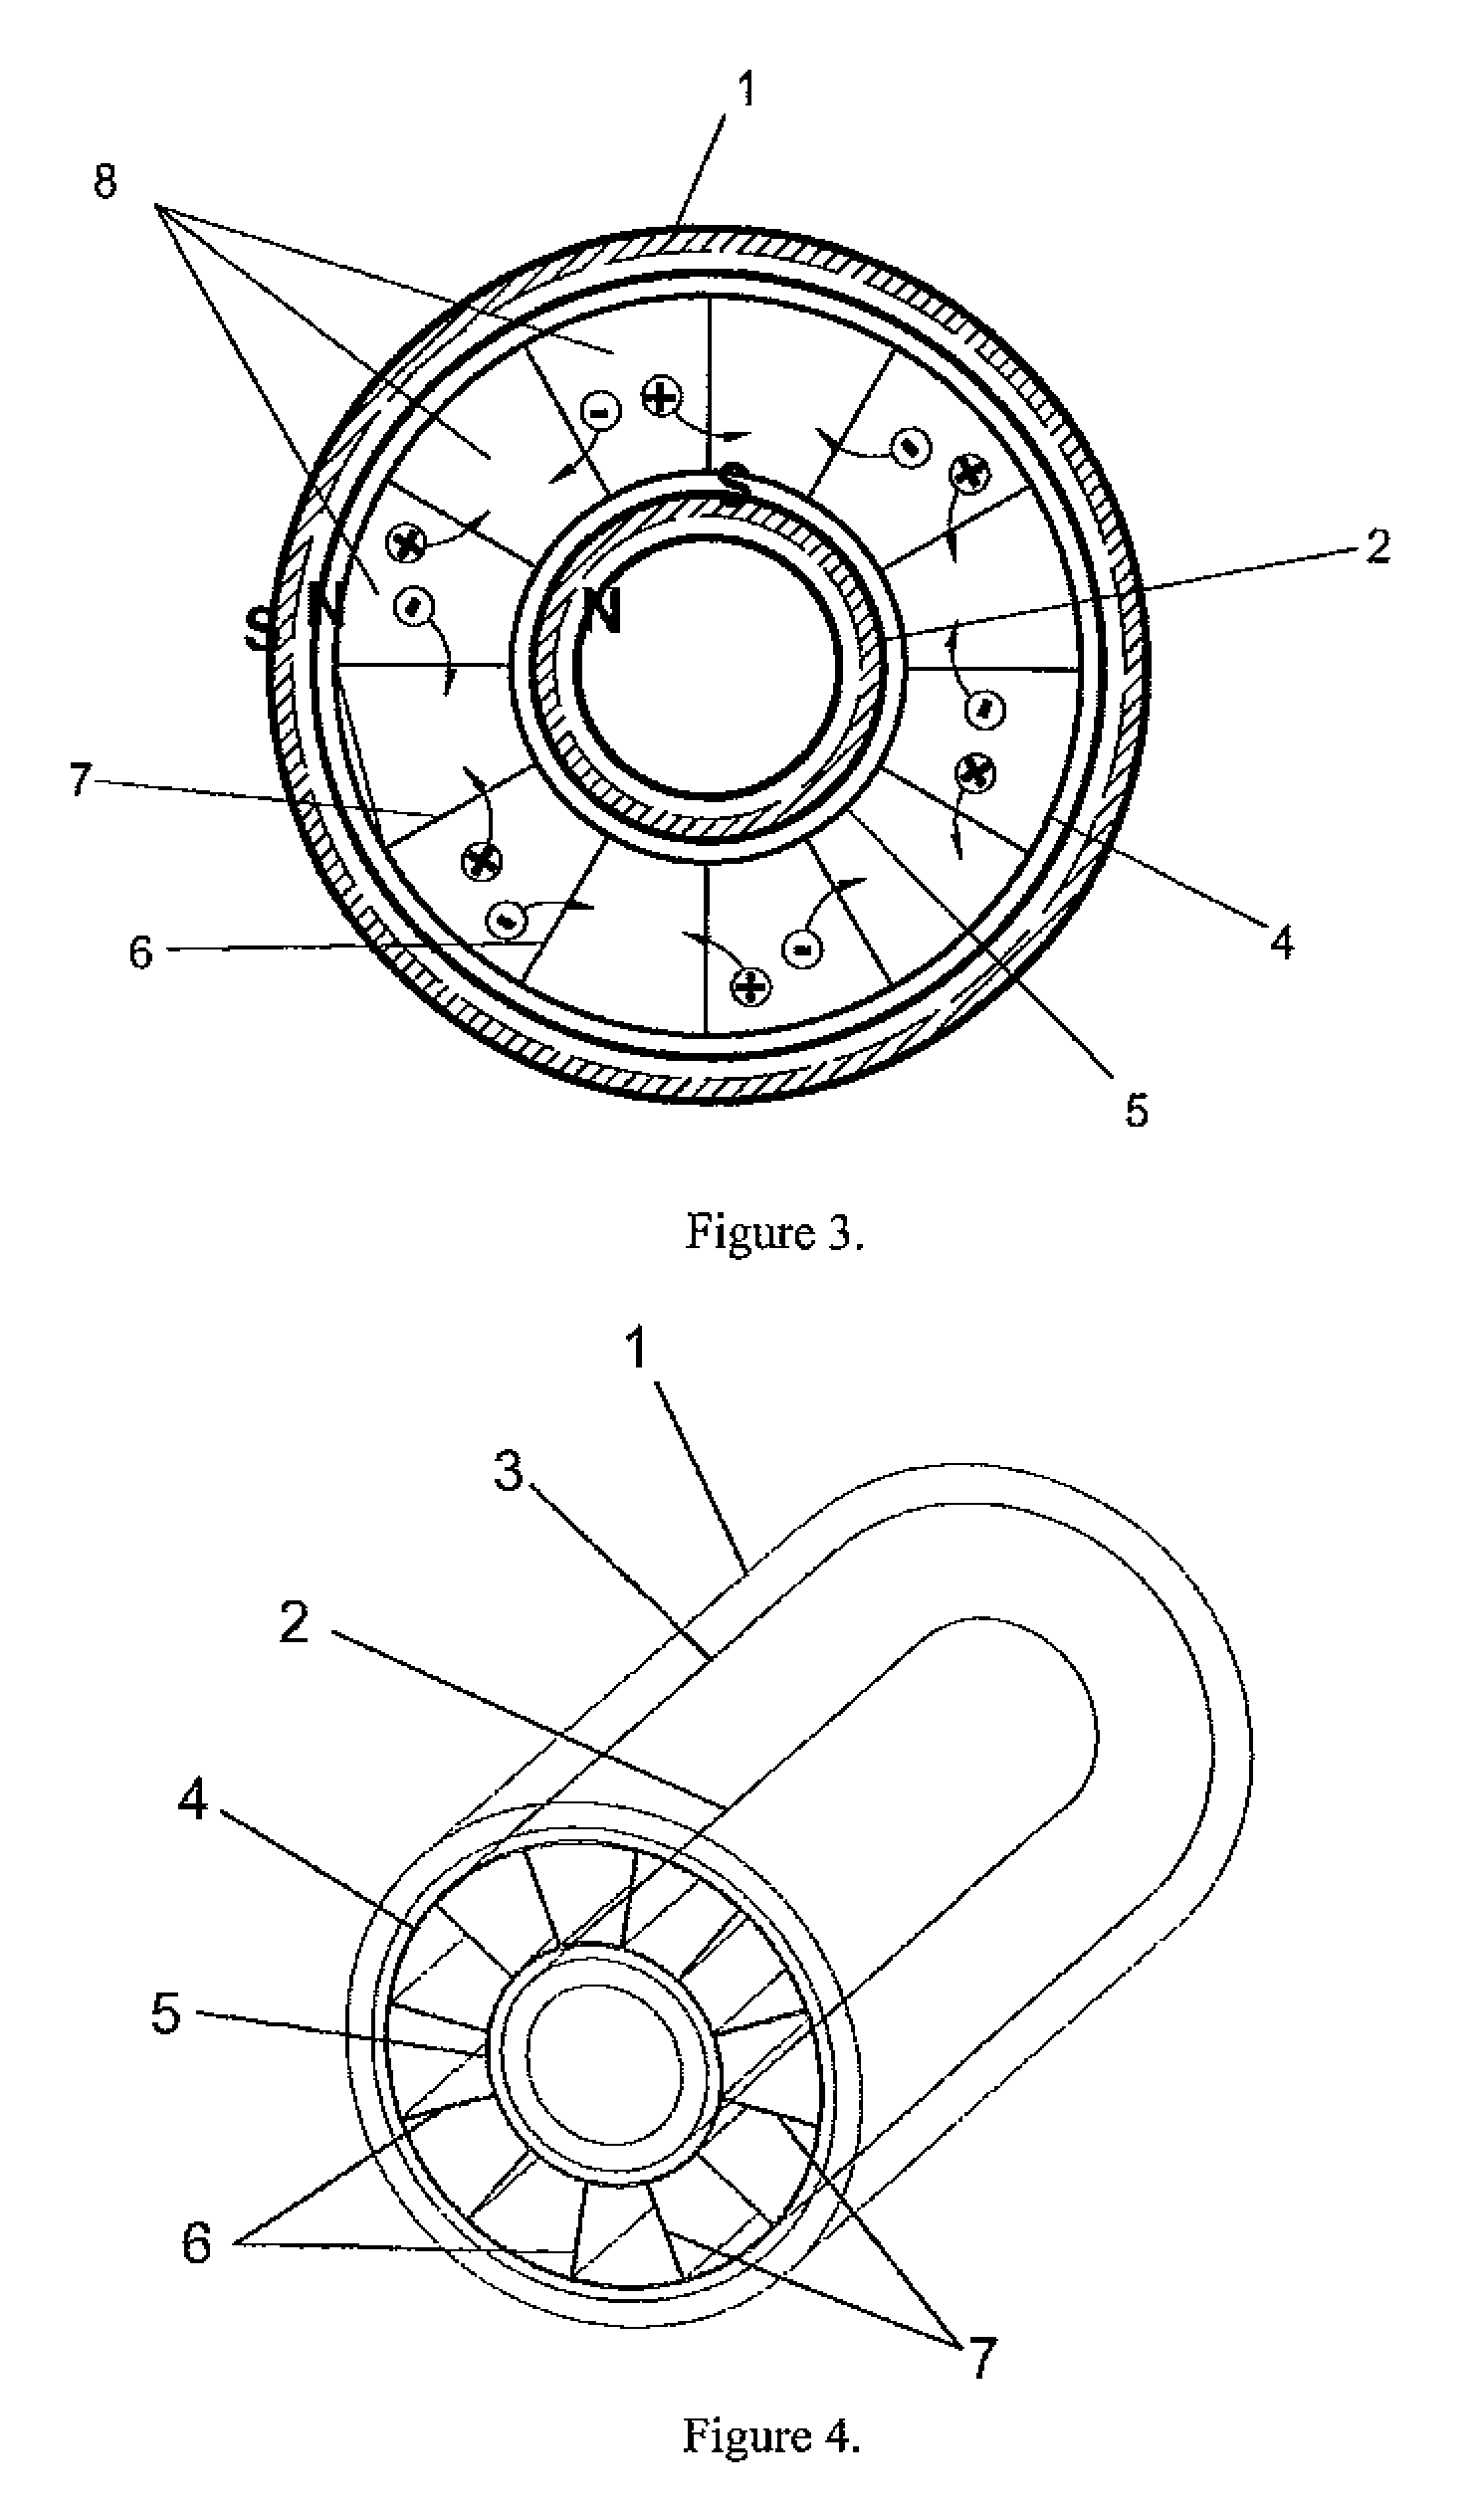 Desalination device using selective membranes and magnetic fields